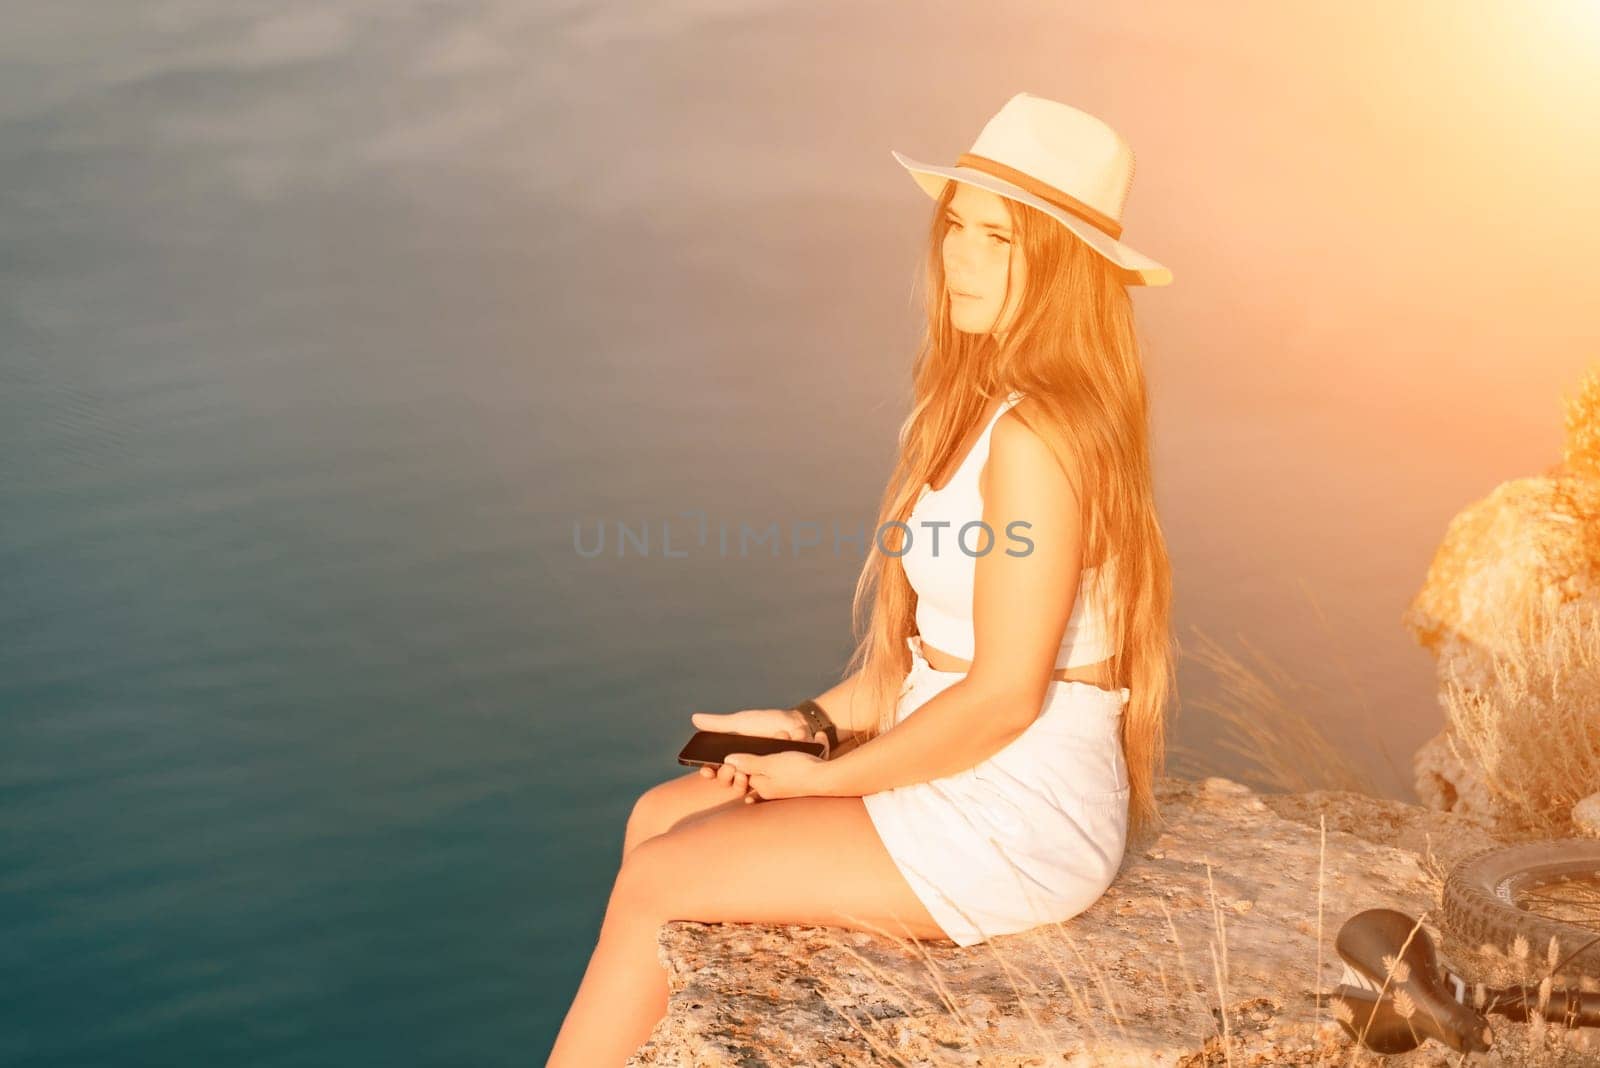 A tourist woman is sitting by the sea in a hat and white summer clothes, looking happy and relaxed